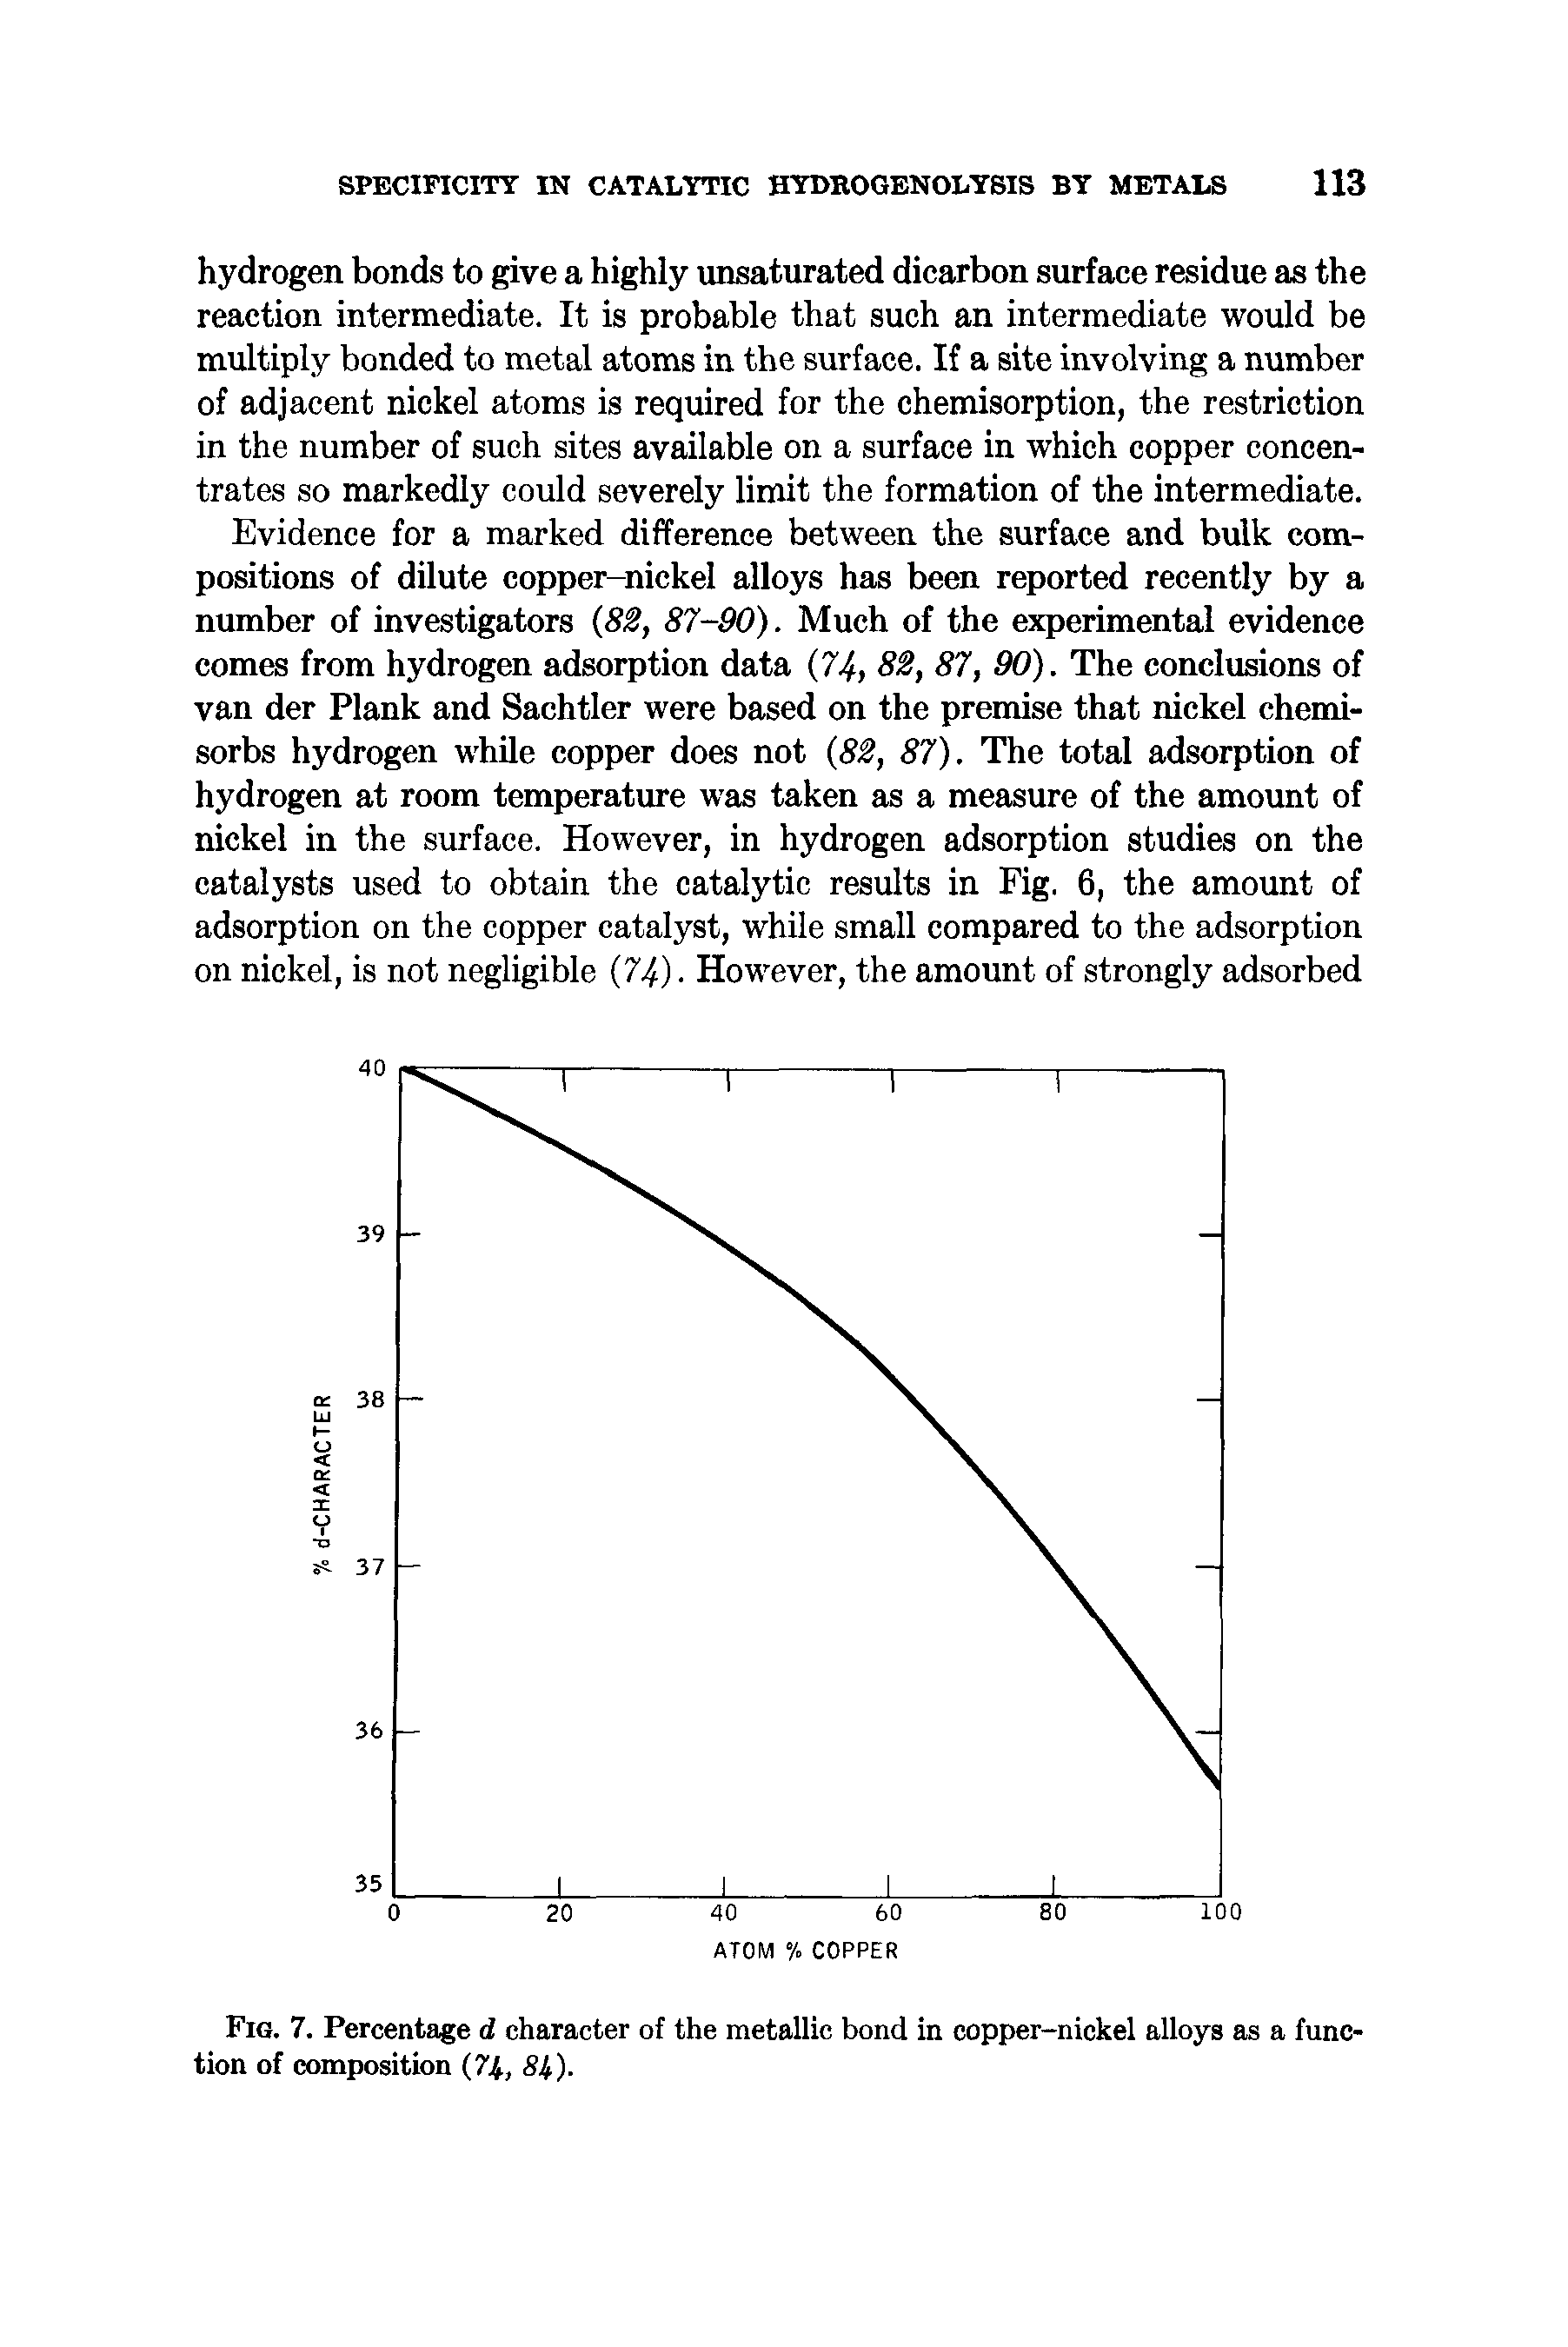 Fig. 7. Percentage d character of the metallic bond in copper-nickel alloys as a function of composition (74, 84).